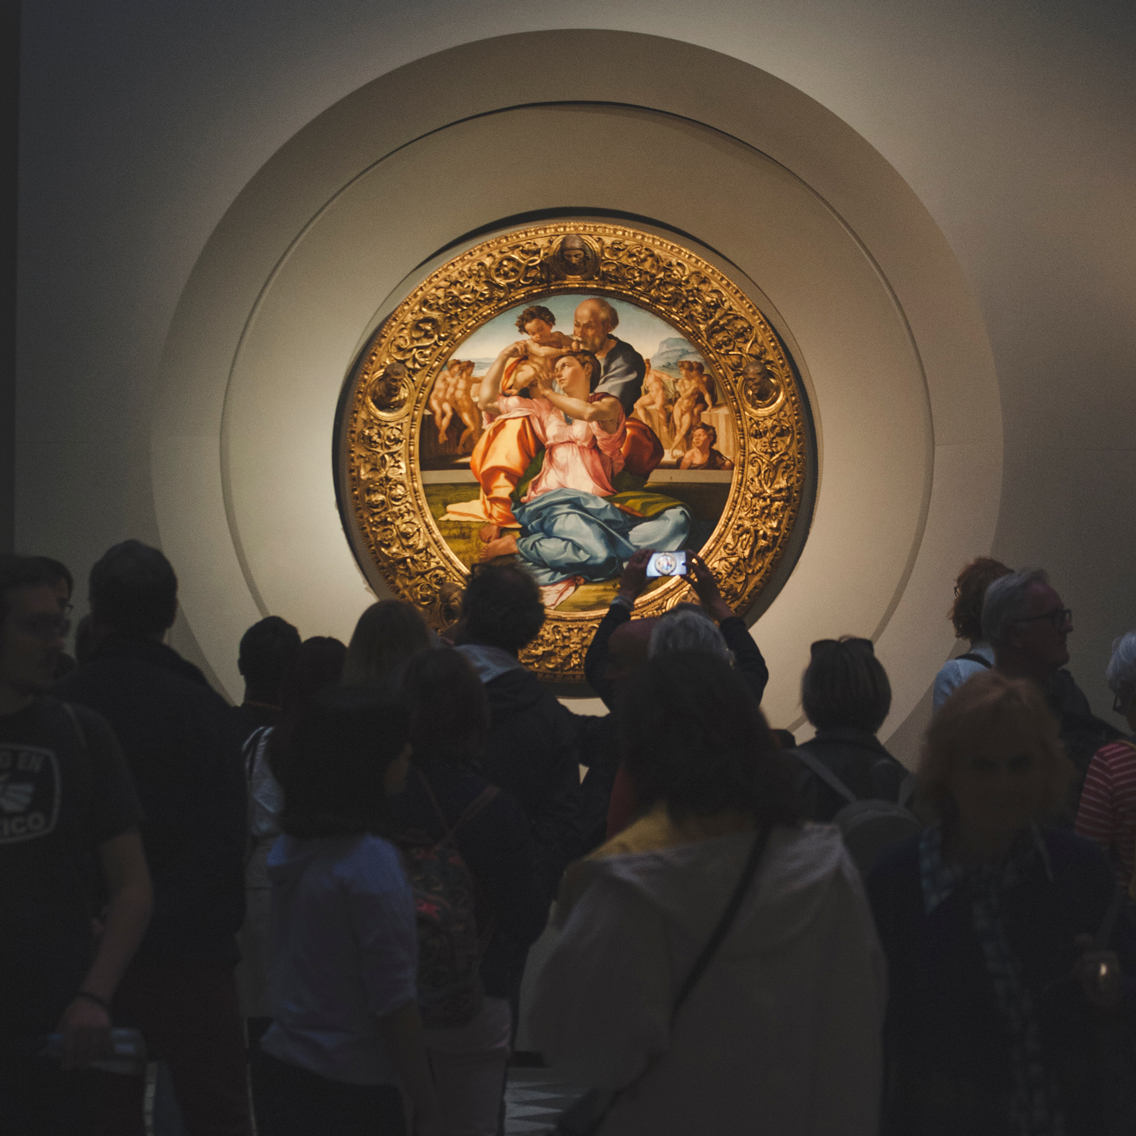 People crowded around a painting with ornate gold frame